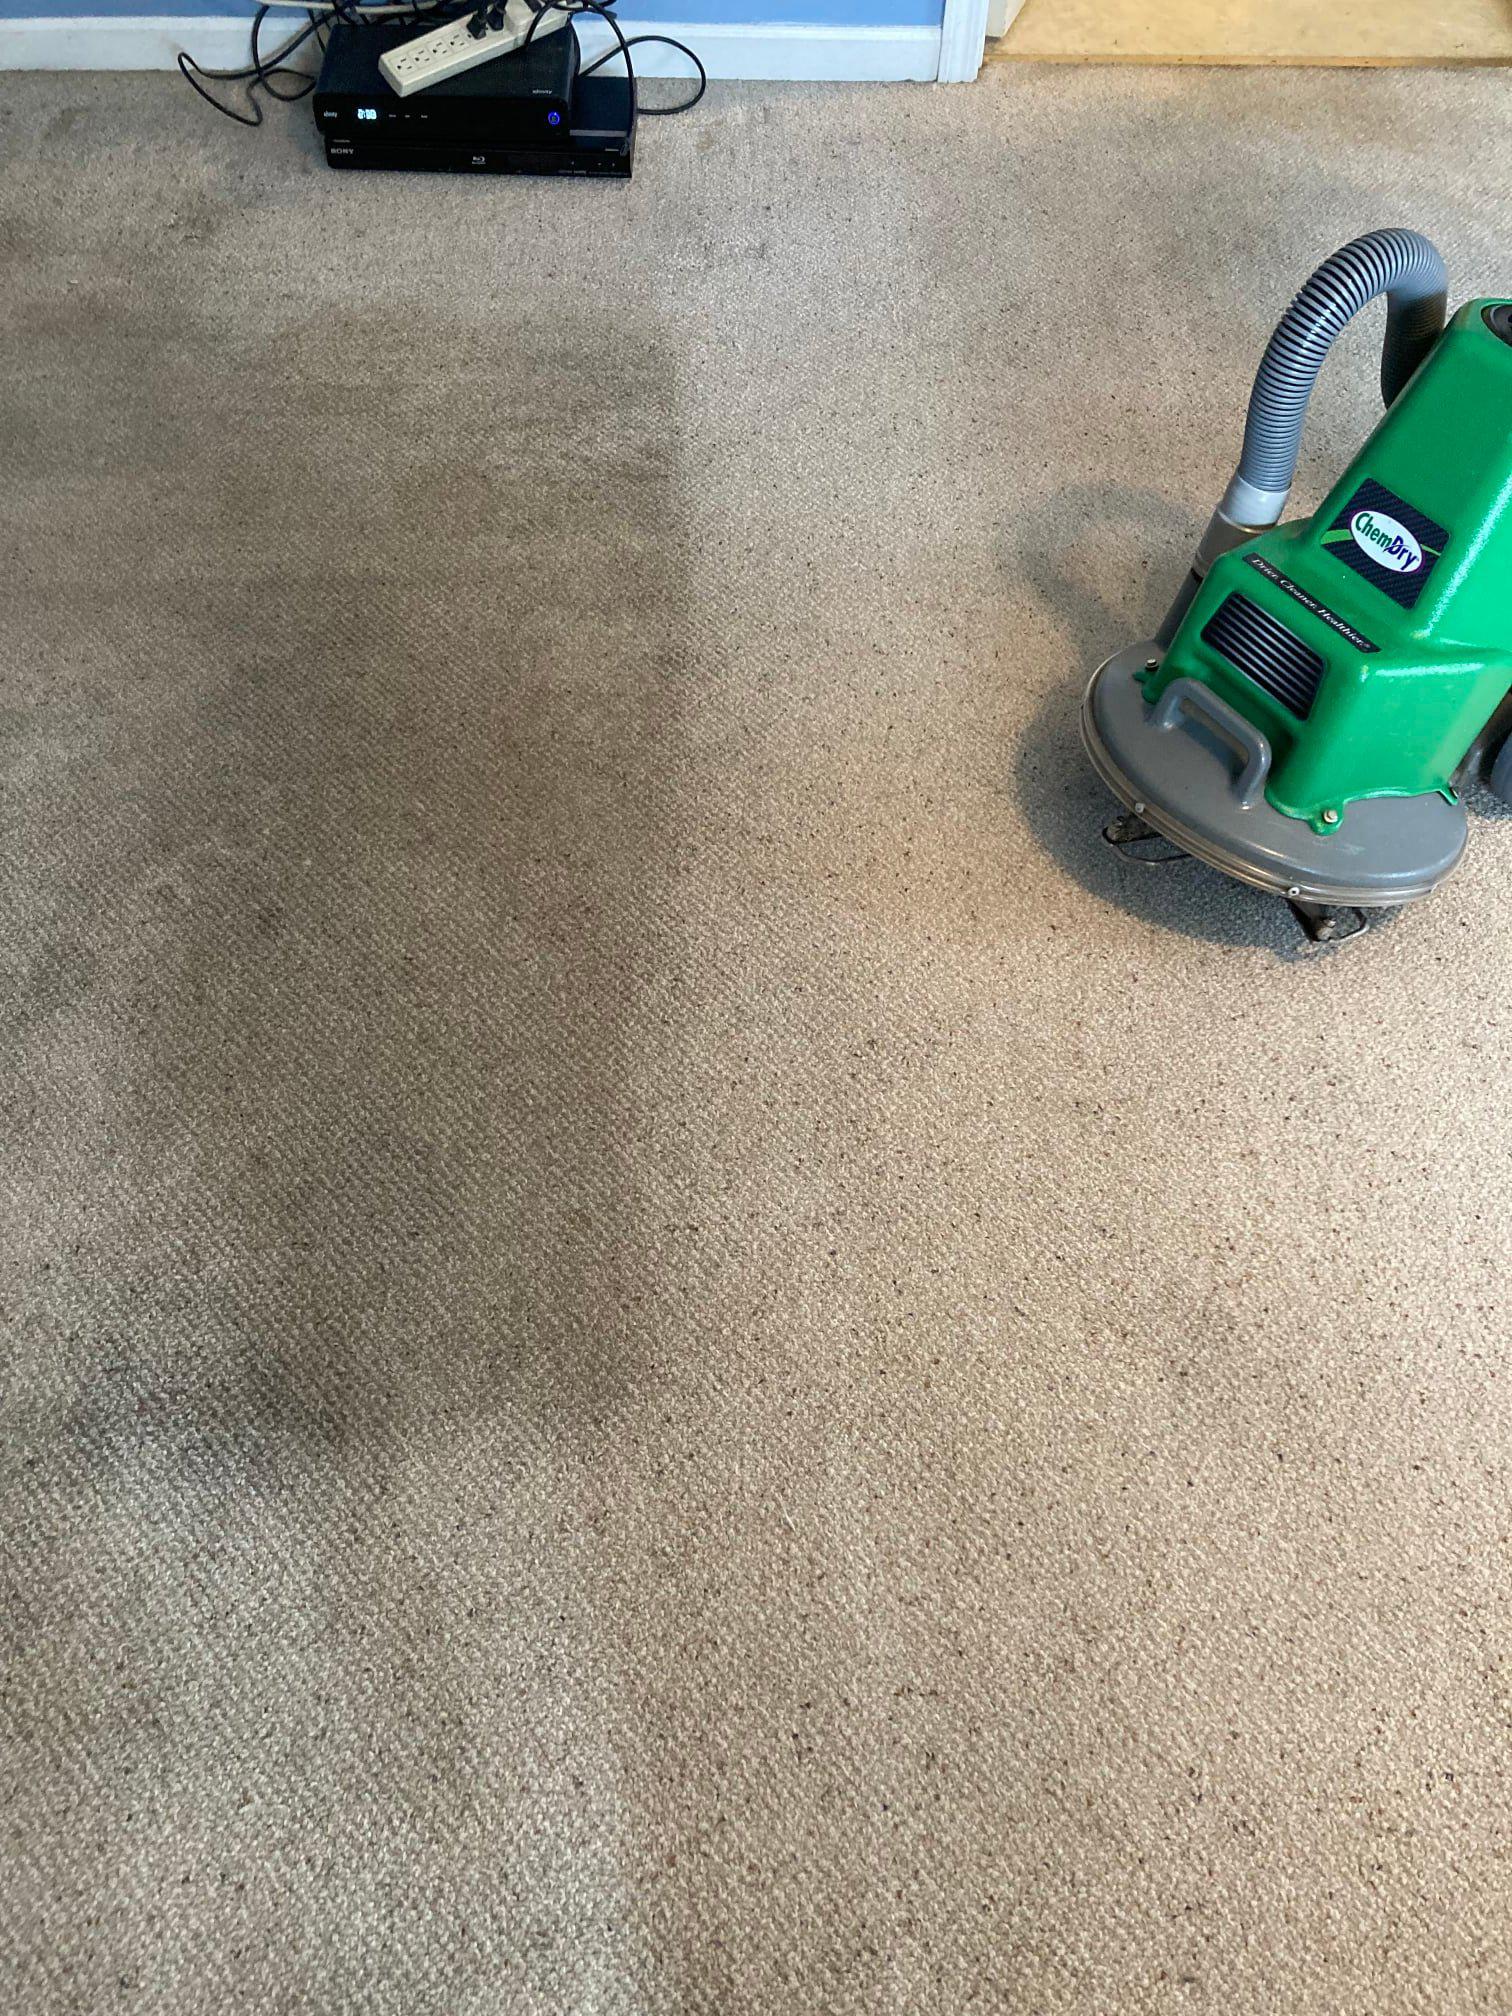 Before and after a carpet cleaning